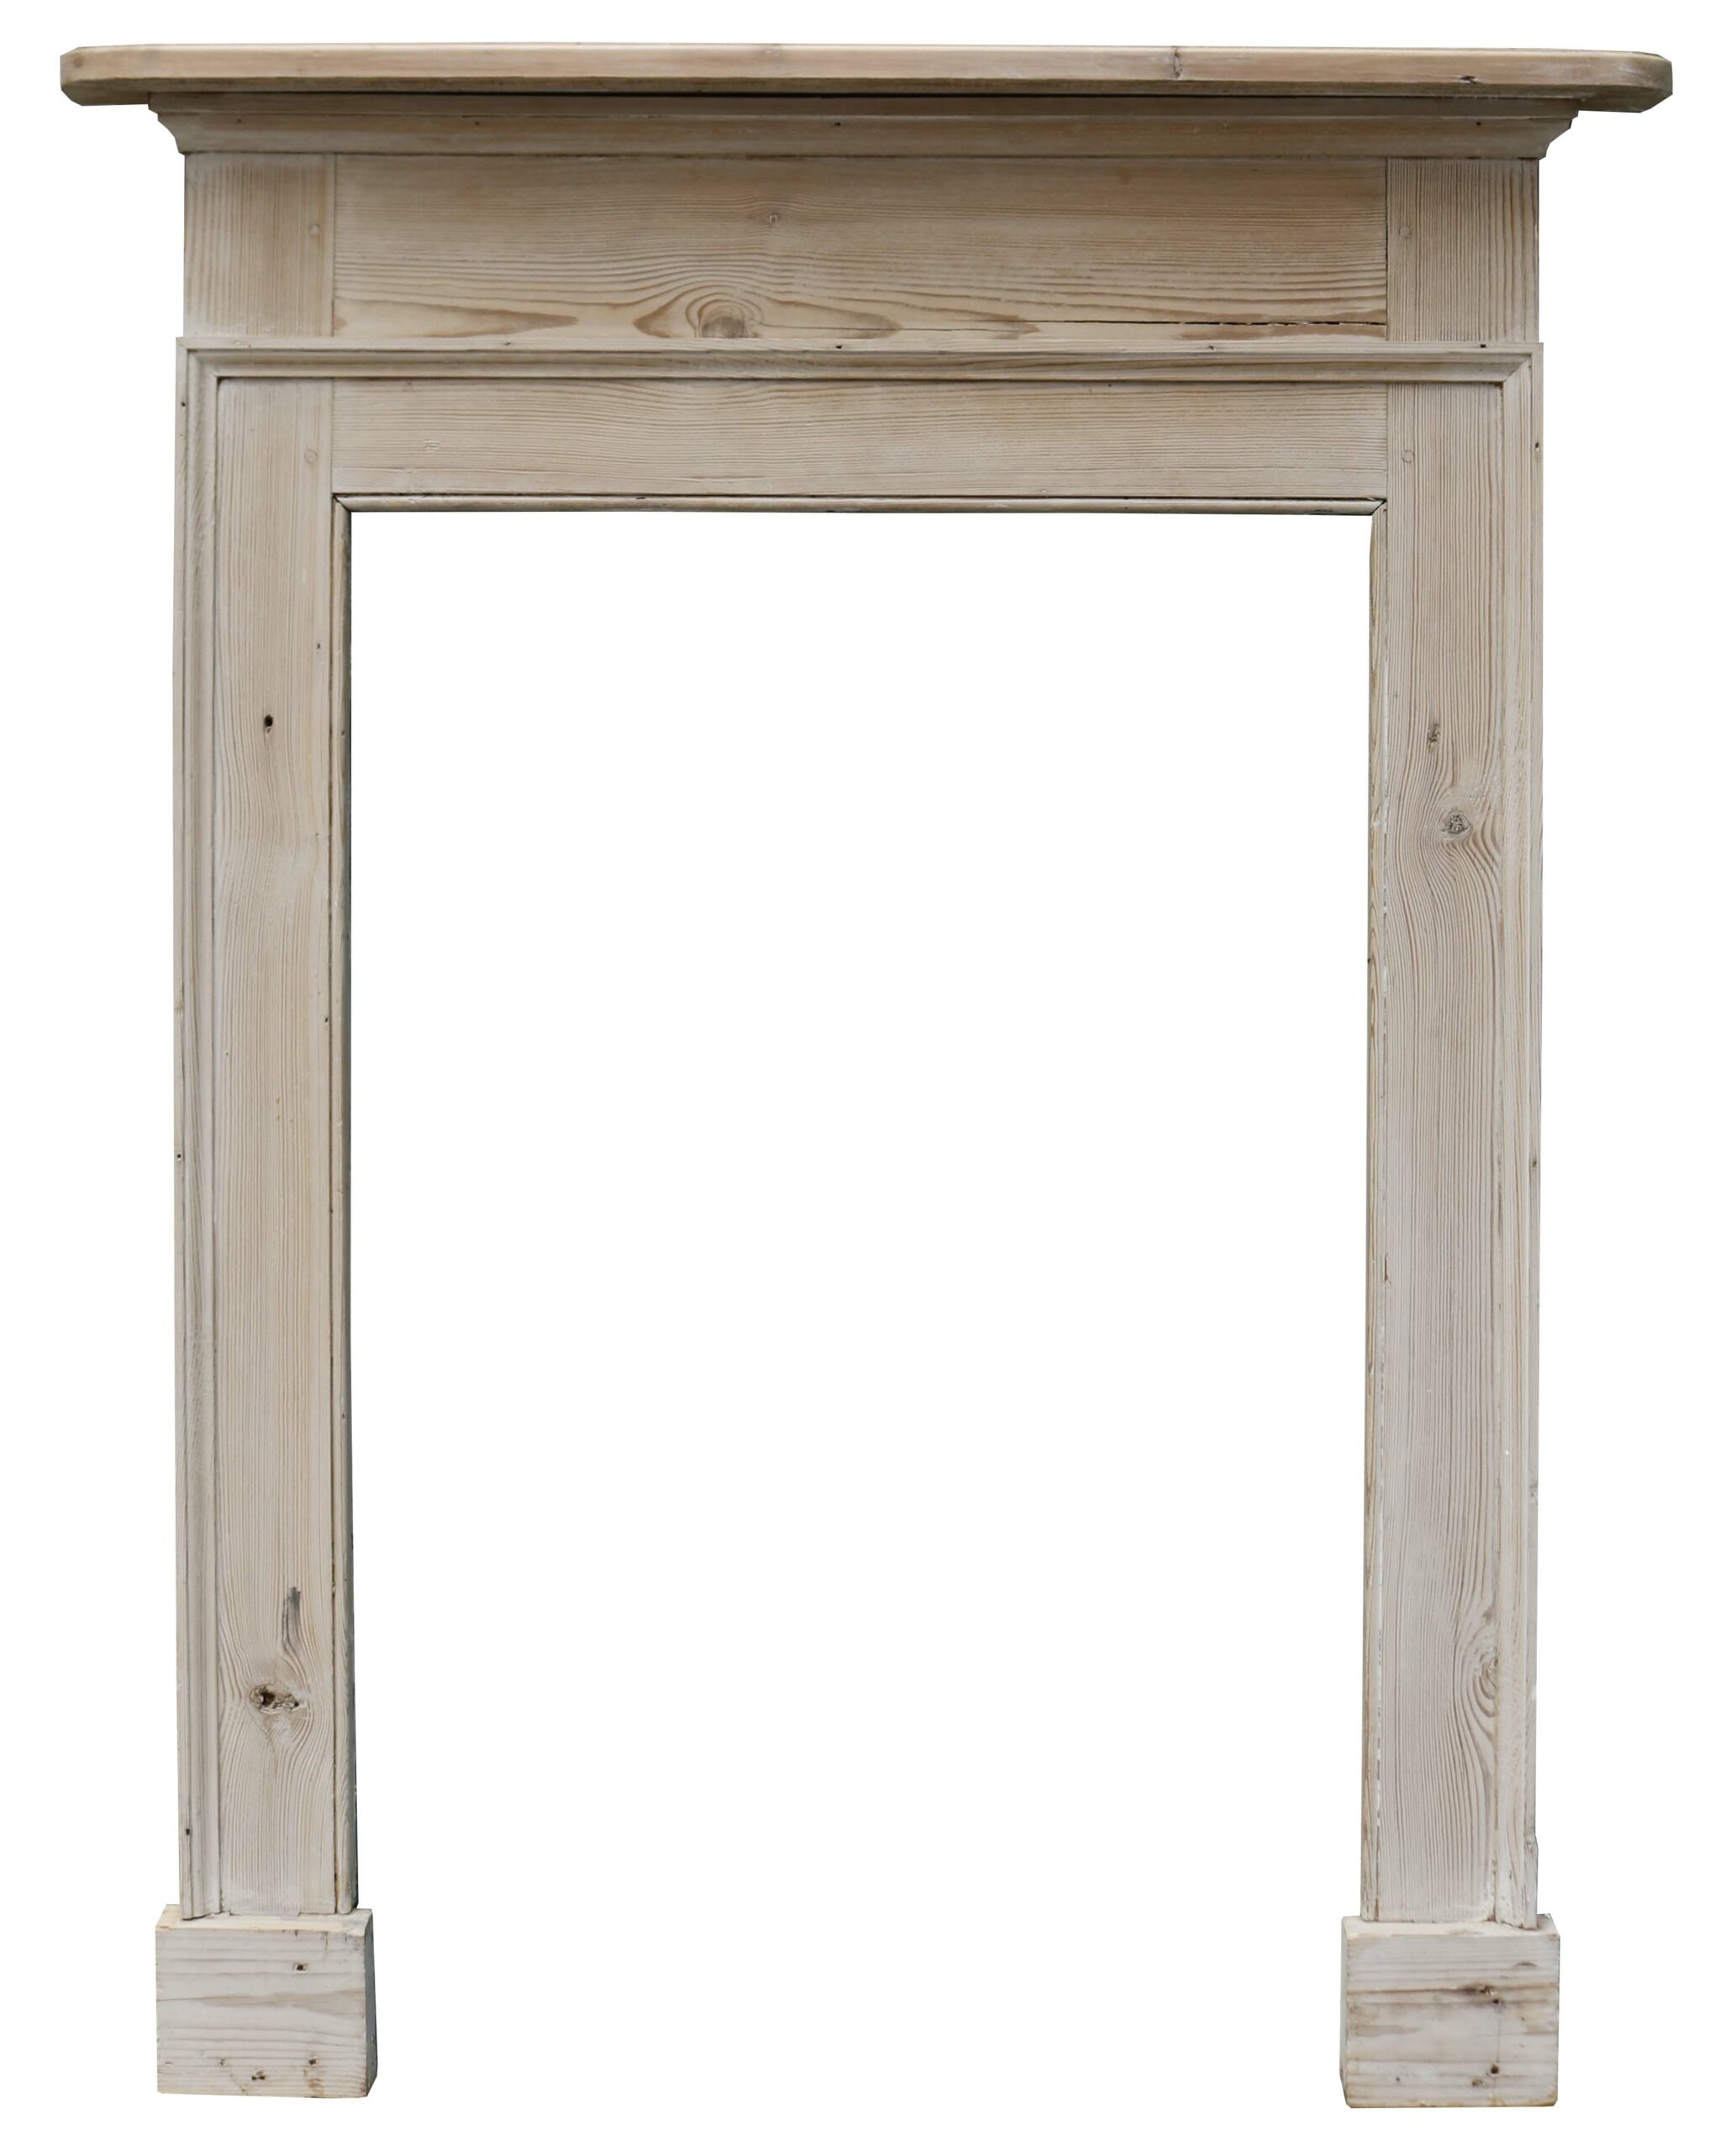 Small Antique English Timber Fireplace